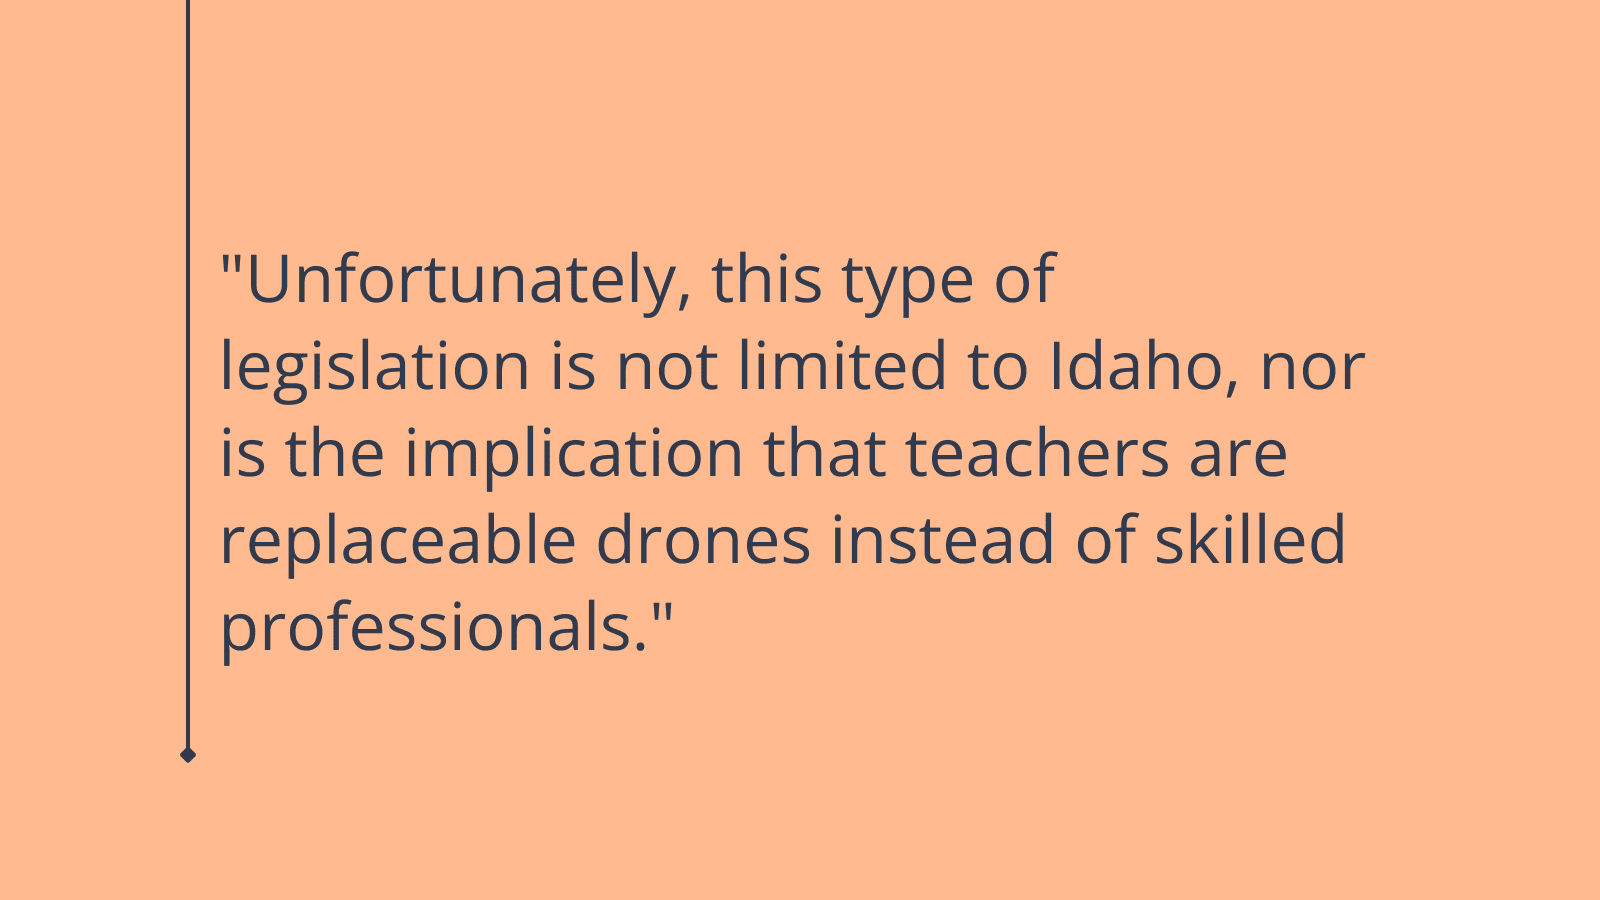 Quote reading ""Unfortunately, this type of legislation is not limited to Idaho, nor is the implication that teachers are replaceable drones instead of skilled professionals."